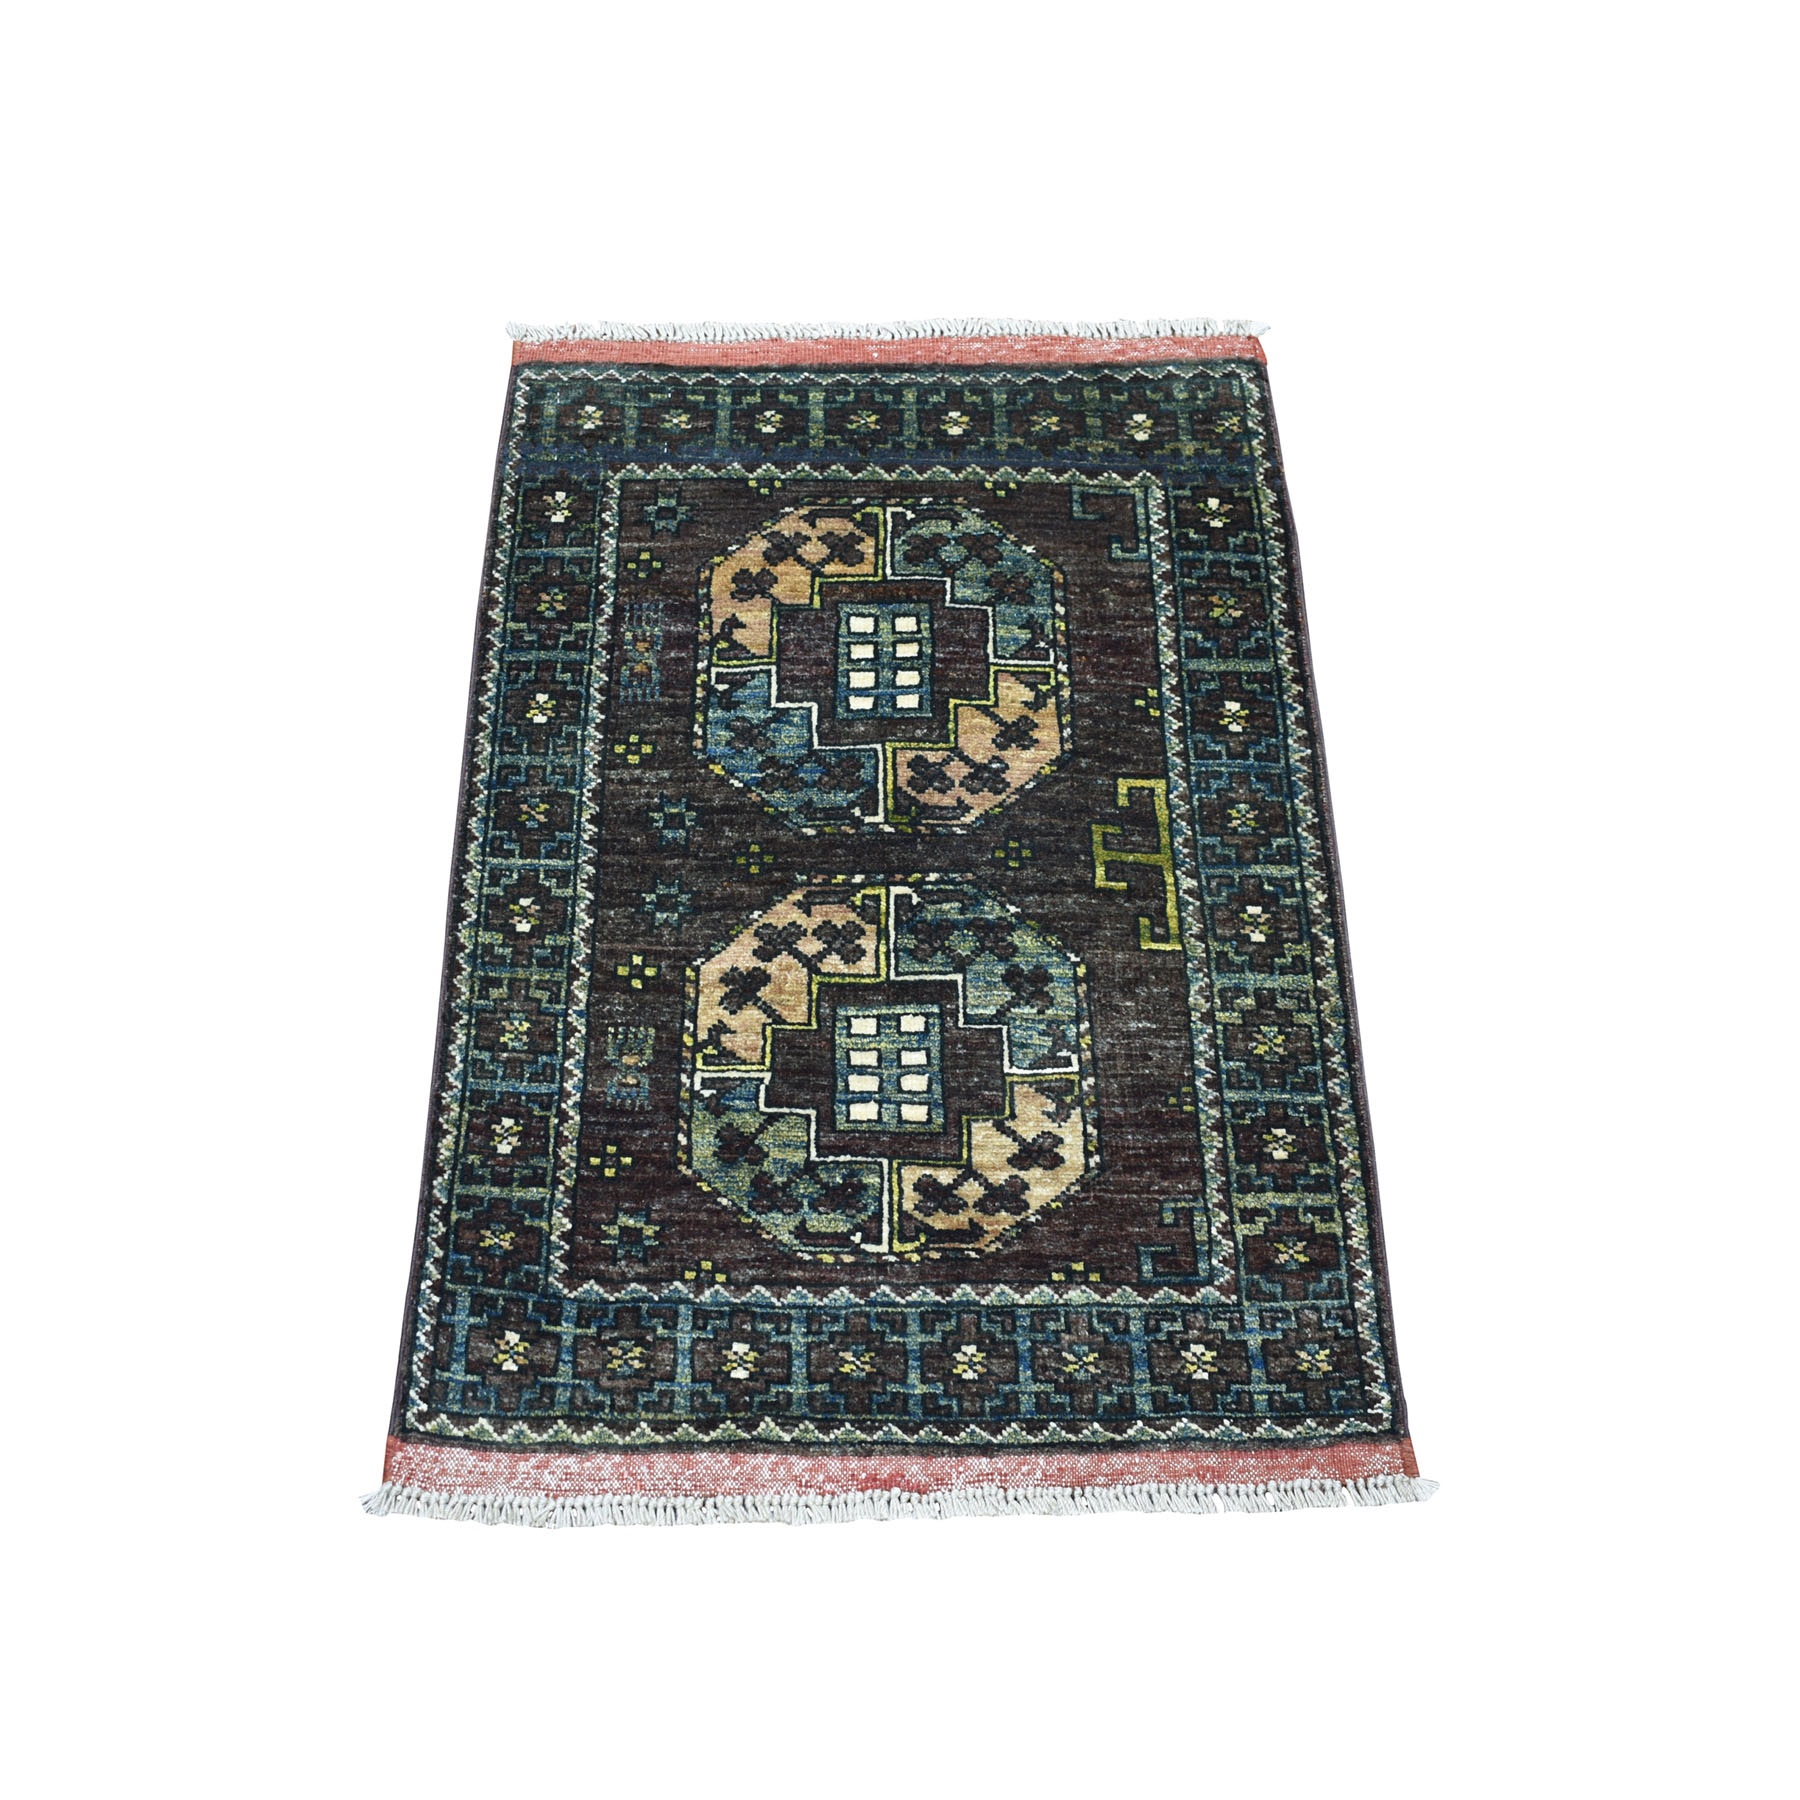 2'X2'10" Natural Dyes Elephant Feet Design Afghan Ersari Hand Knotted Pure Wool Oriental Rug moaecbe9